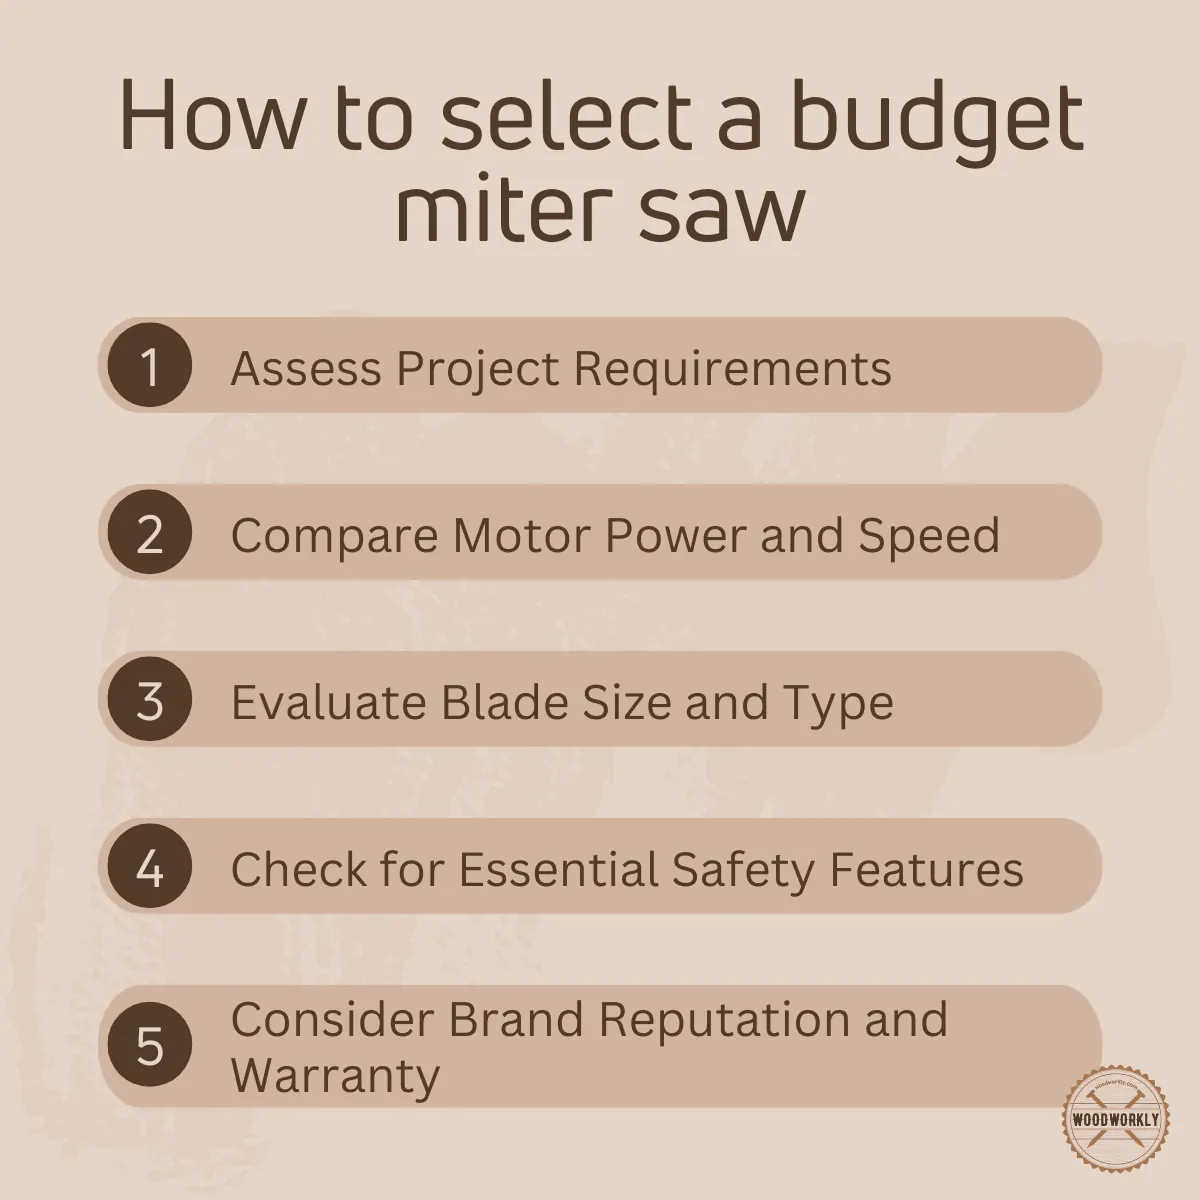 How to select a budget miter saw